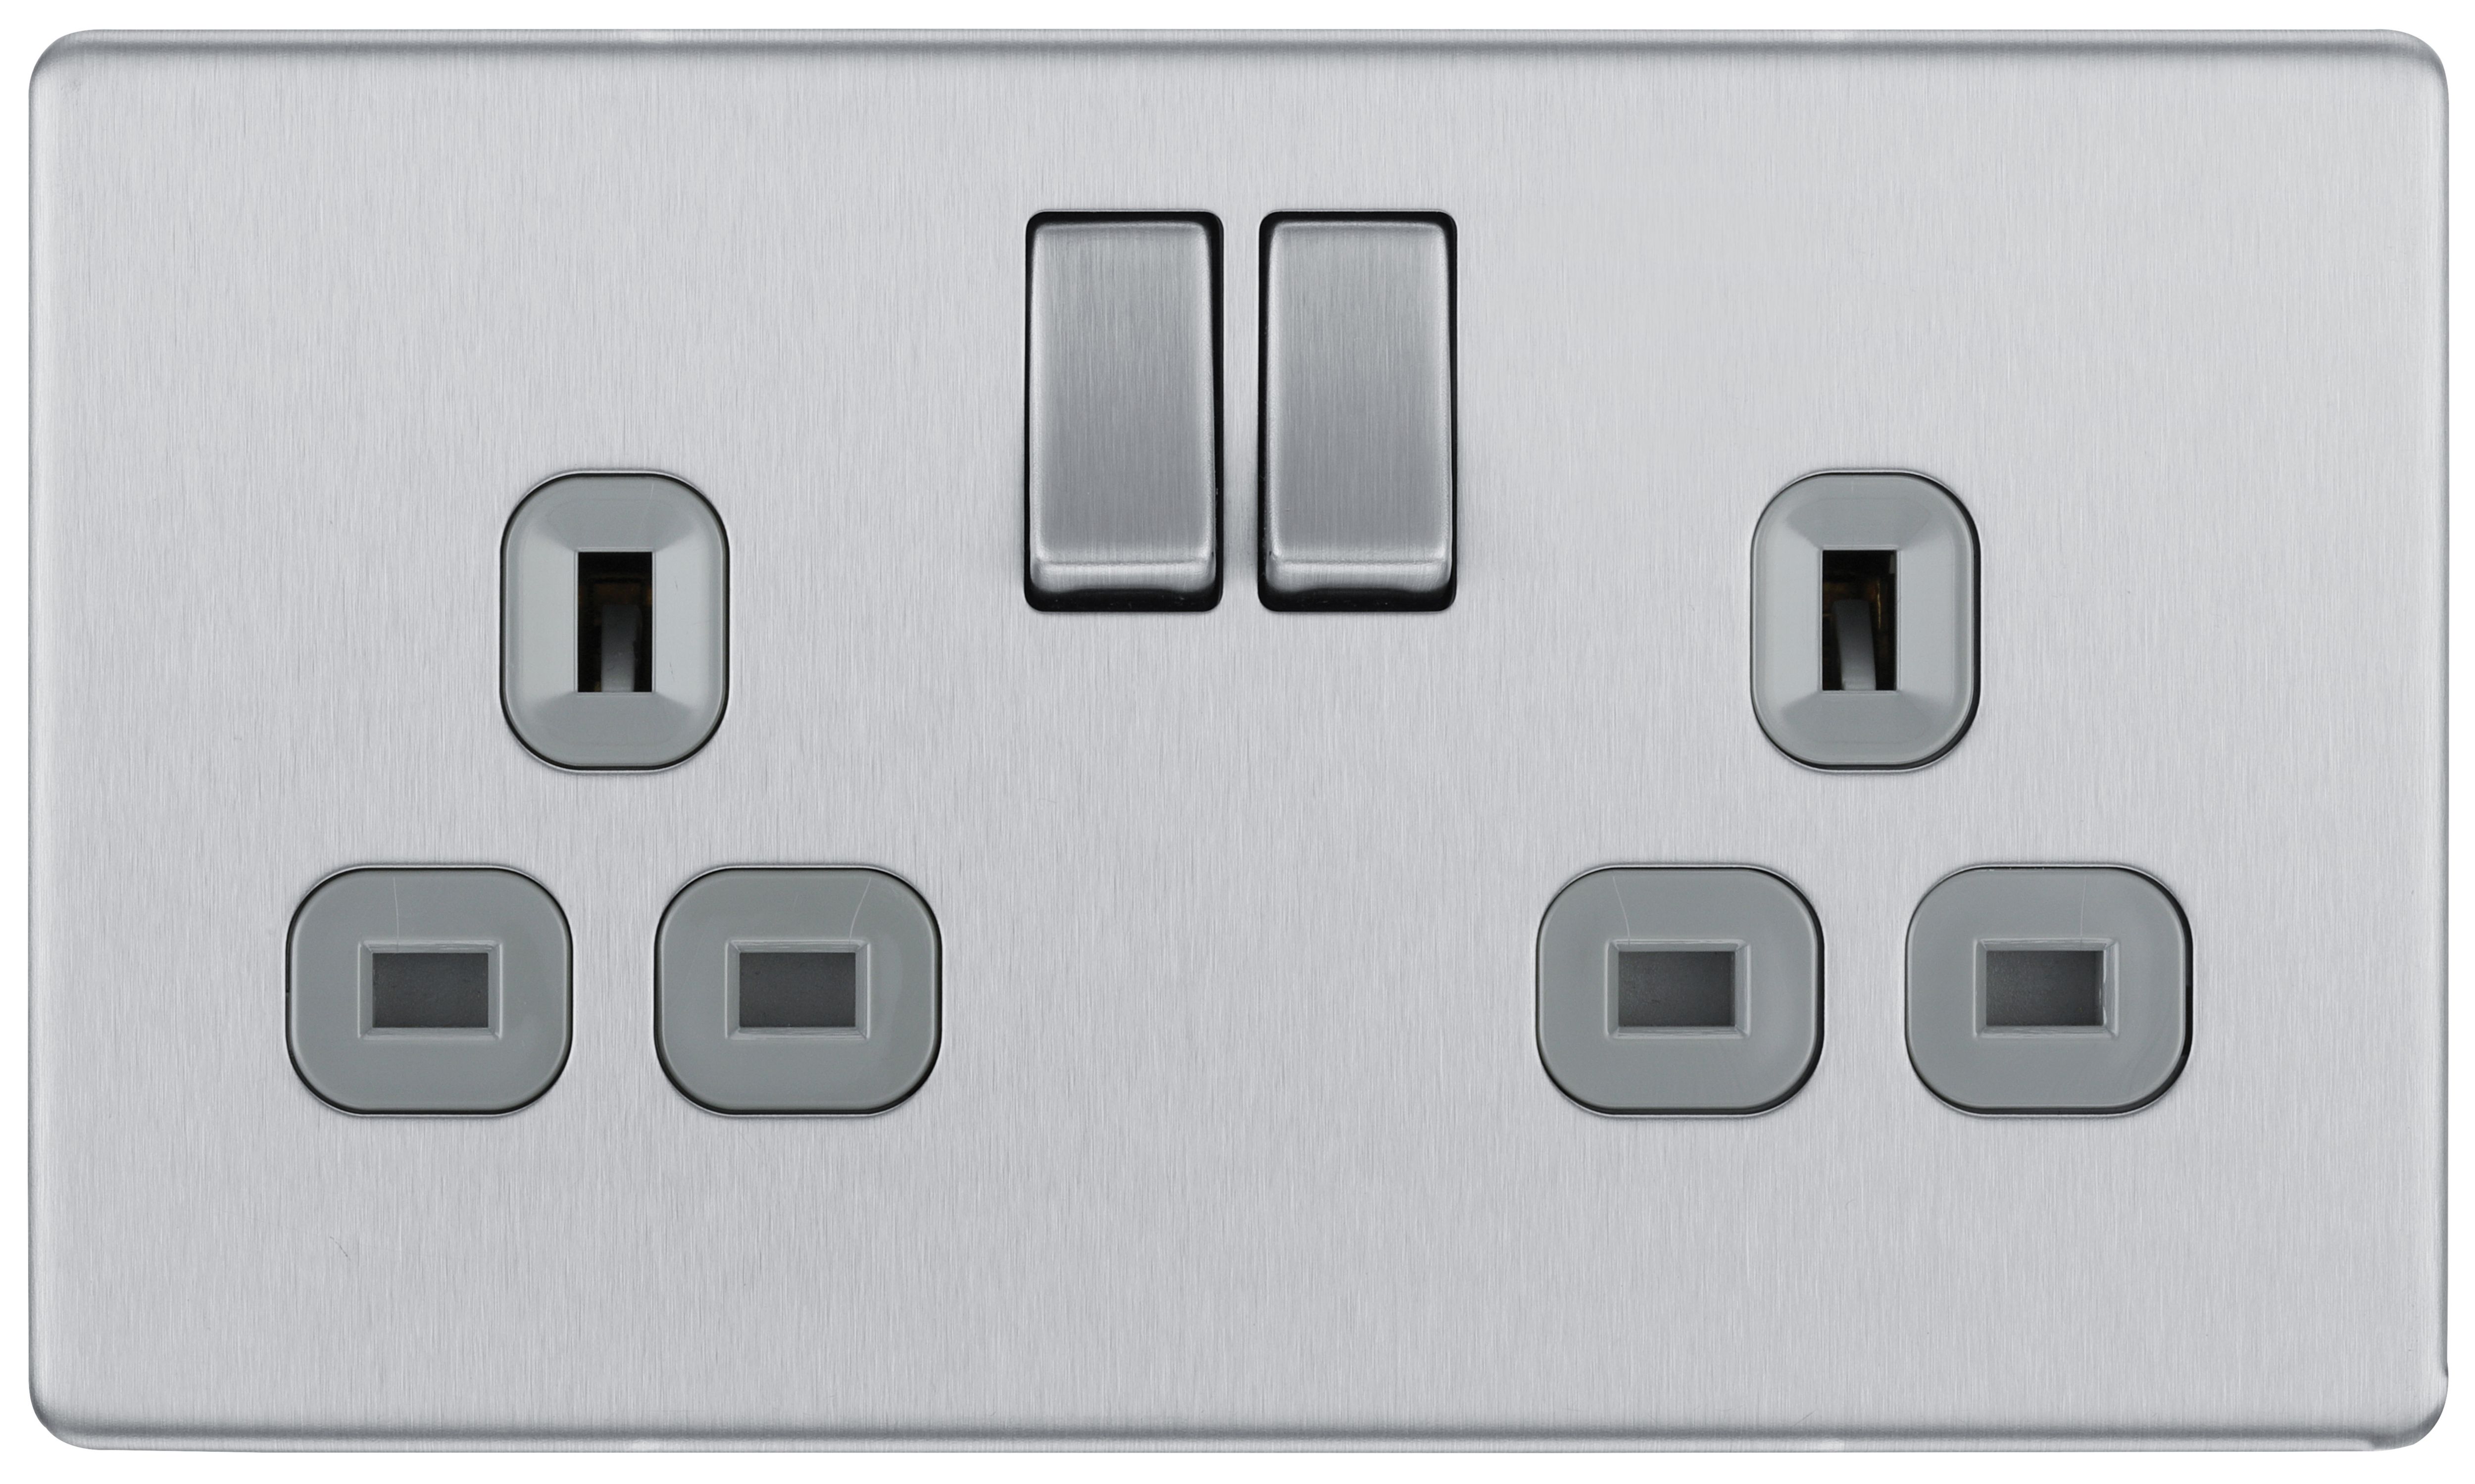 BG Screwless Flatplate Brushed Steel Double Switched 13A Power Socket Double Pole